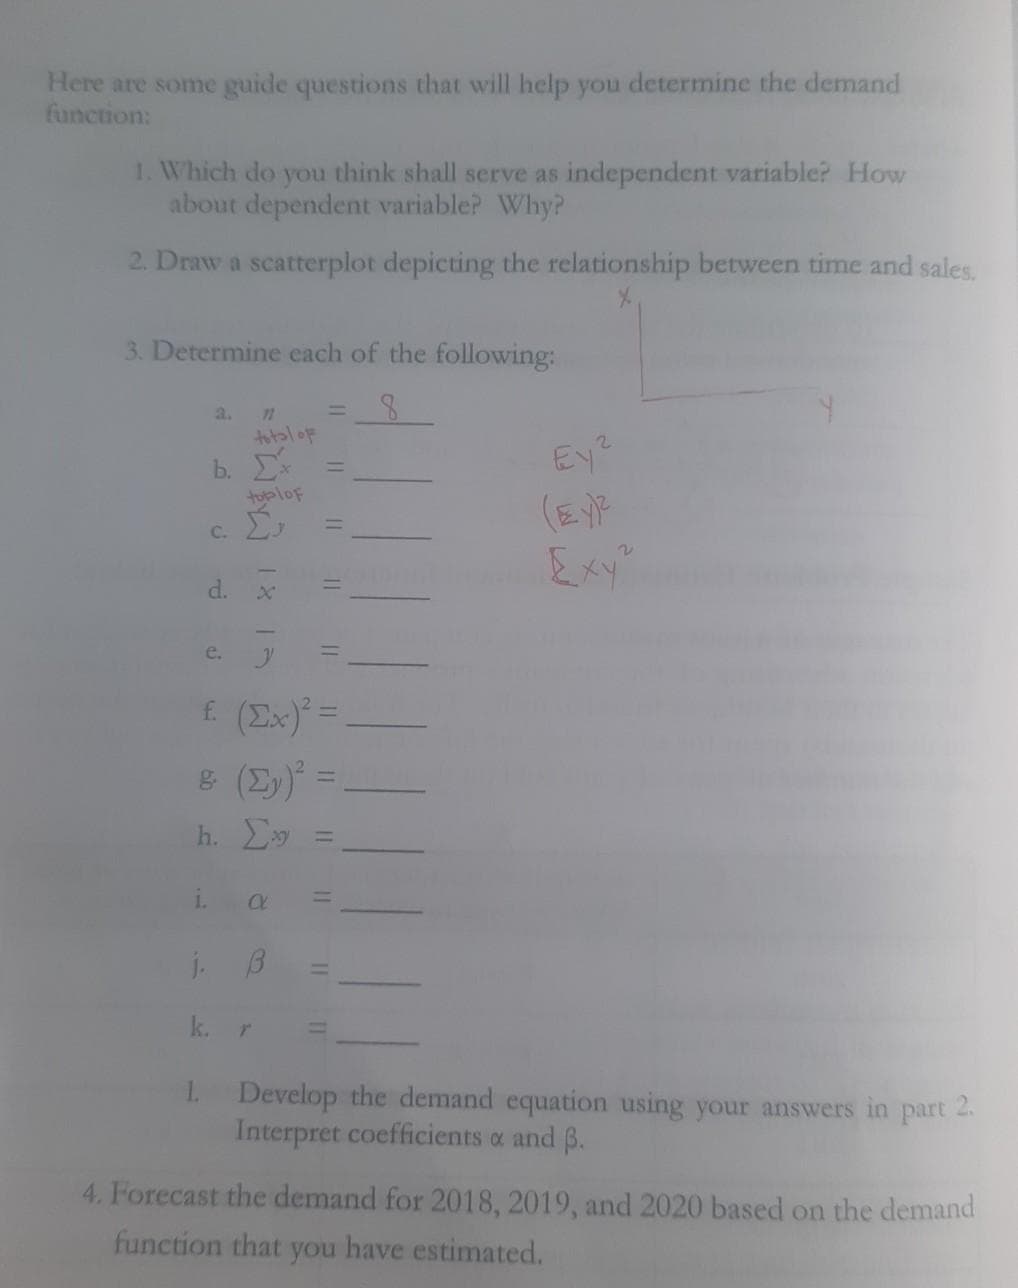 Here are some guide questions that will help you determine the demand
function:
1. Which do you think shall serve as independent variable? How
about dependent variable? Why?
2. Draw a scatterplot depicting the relationship between time and sales.
3. Determine each of the following:
a.
72
totaloF
Ey?
b.
tubloF
C.
Exy"
d.
e.
£ (Ex)* =
h. y
1.
j.
1 Develop the demand equation using your answers in part 2.
Interpret coefficients a and B.
4. Forecast the demand for 2018, 2019, and 2020 based on the demand
function that you have estimated.
11
